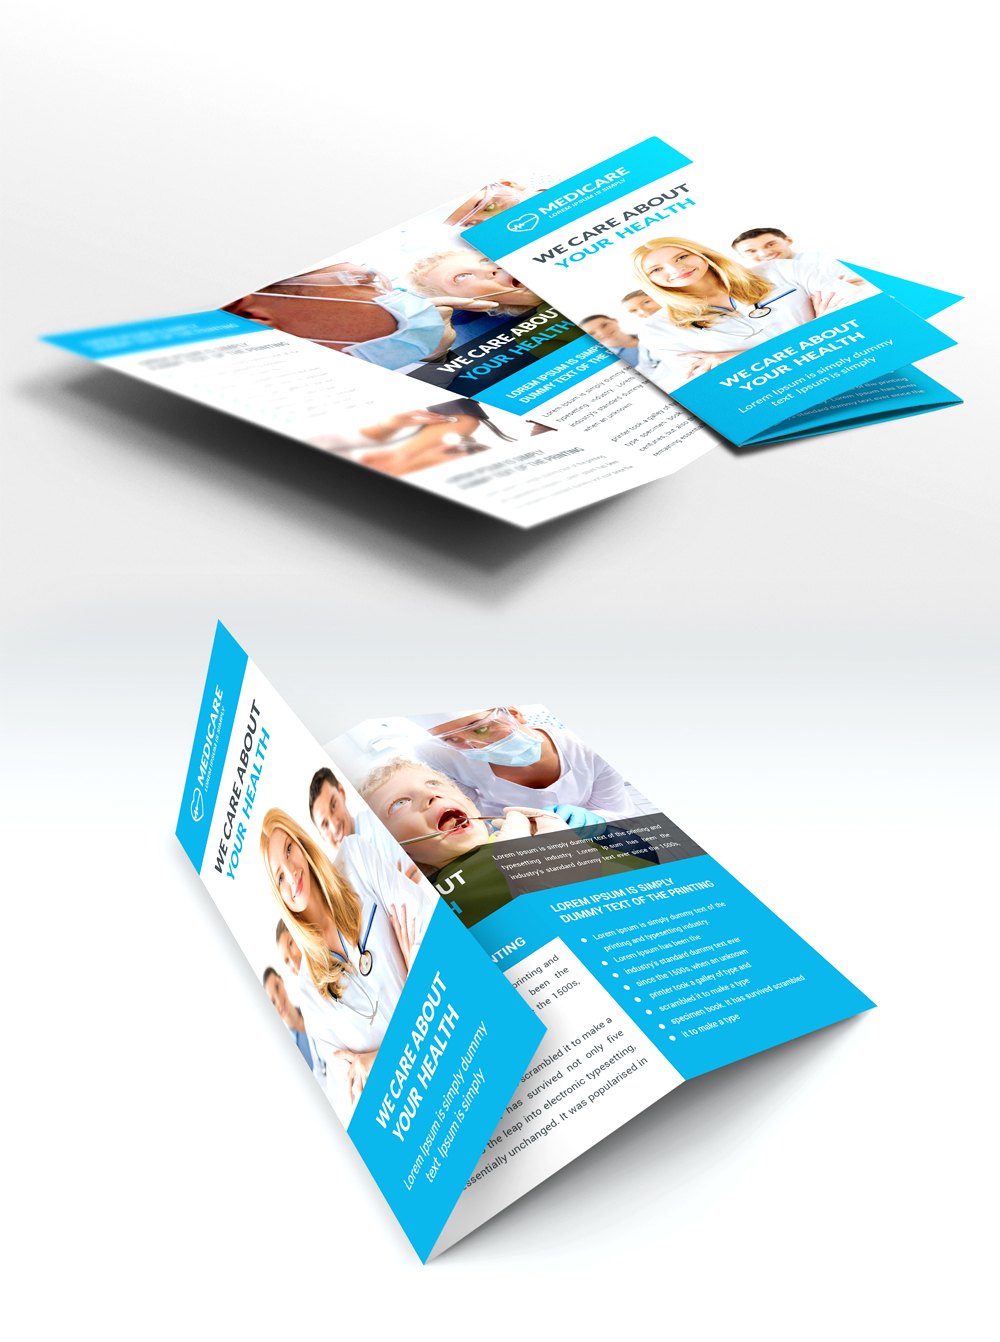 Medical and Hospital Trifold Brochure Free PSD on Behance Regarding Healthcare Brochure Templates Free Download